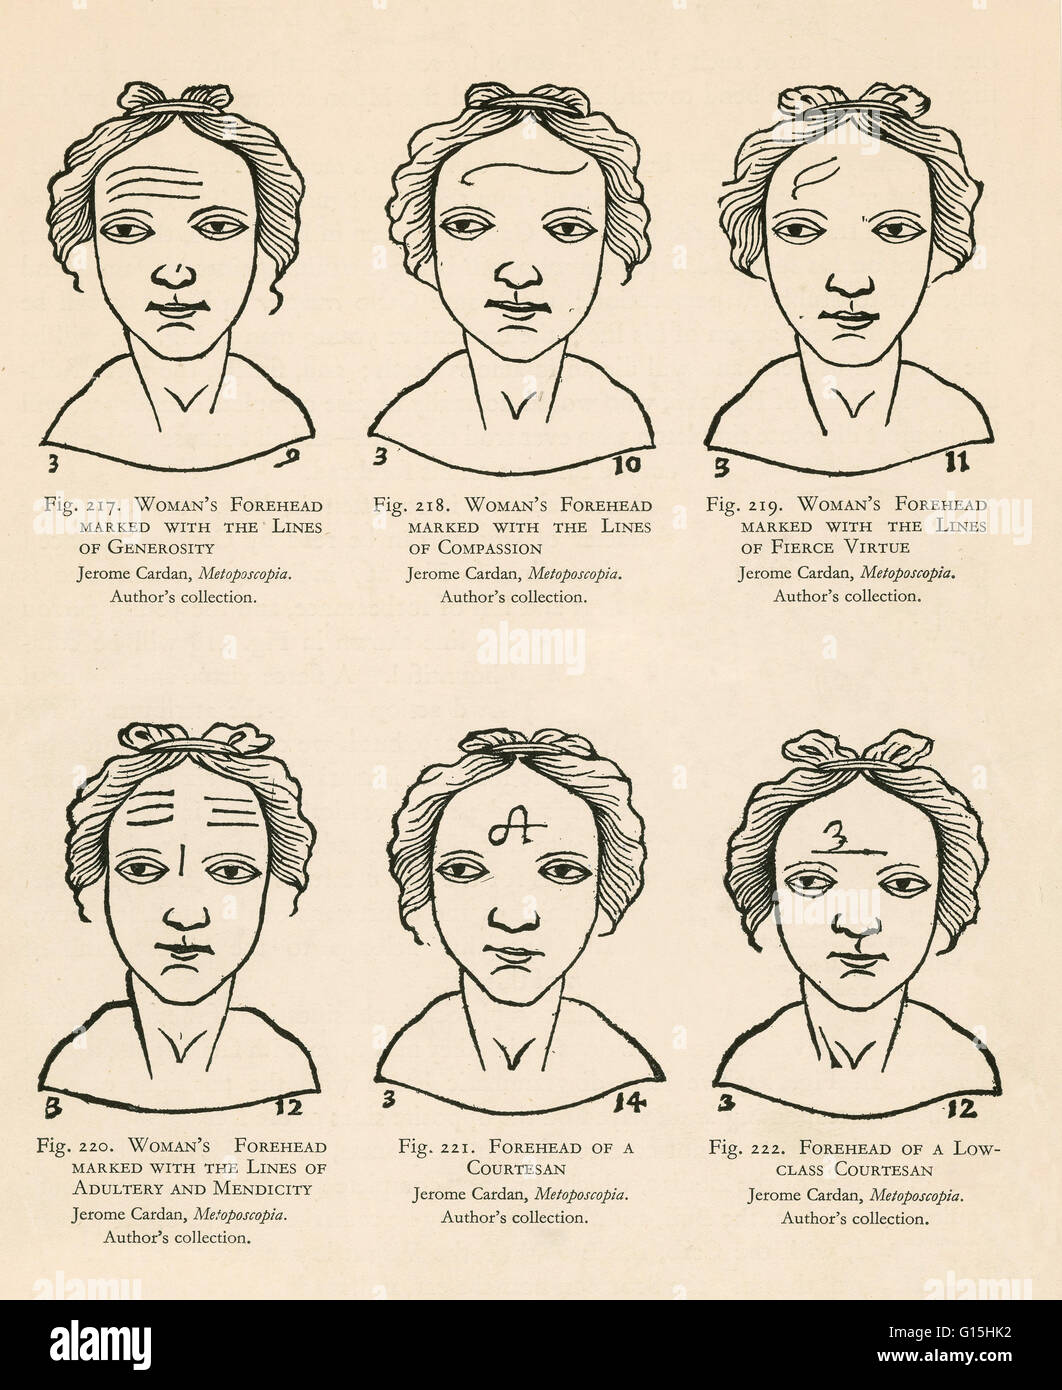 Physiognomy, assessment of a person's character or personality from their outer appearance, particularly the face. In this sketch six assessments of women's foreheads are represented: lines of generosity (top left), lines of compassion (top middle), lines Stock Photo